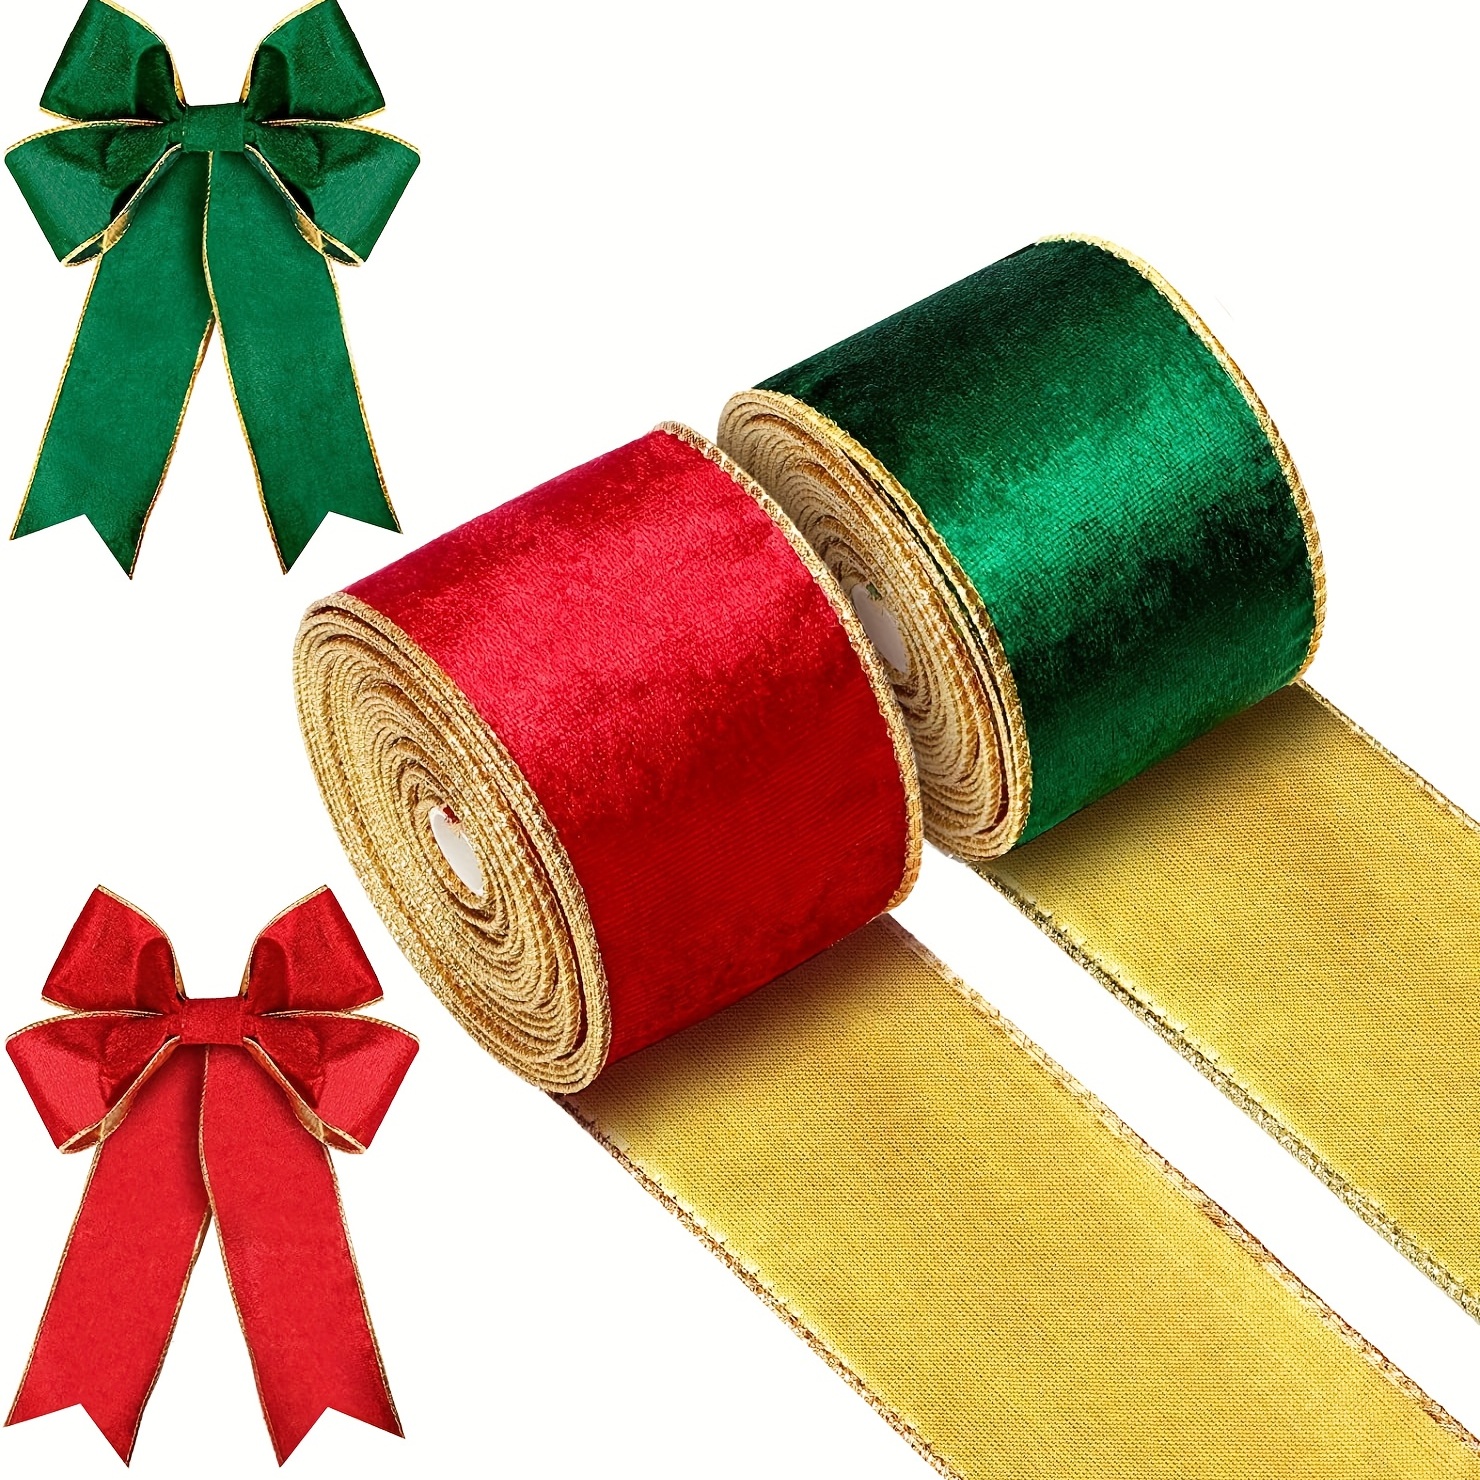 50 Yards 2.5 Inch Christmas Red Velvet Wired Ribbon Fabric Decorative  Ribbon Gift Wrapping Ribbon for DIY Craft Christmas Holiday Bows Wreath  Wedding